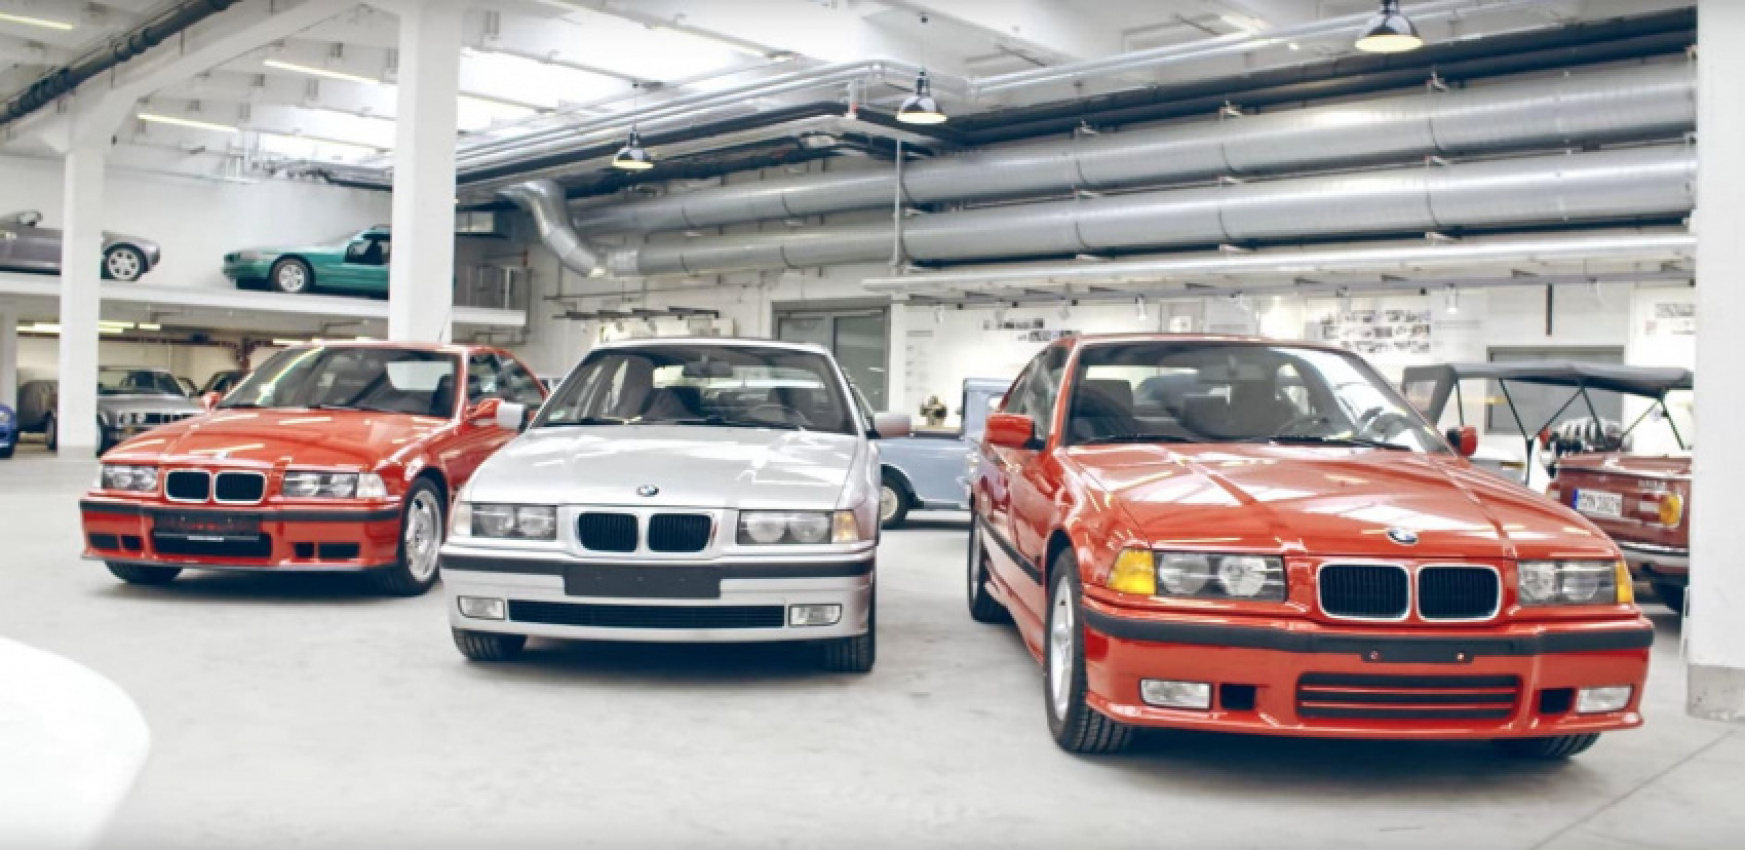 autos, bmw, cars, bmw e36, bmw e36 compact, e36 compact, bmw e36 compact abandoned for 13 years brought back to life